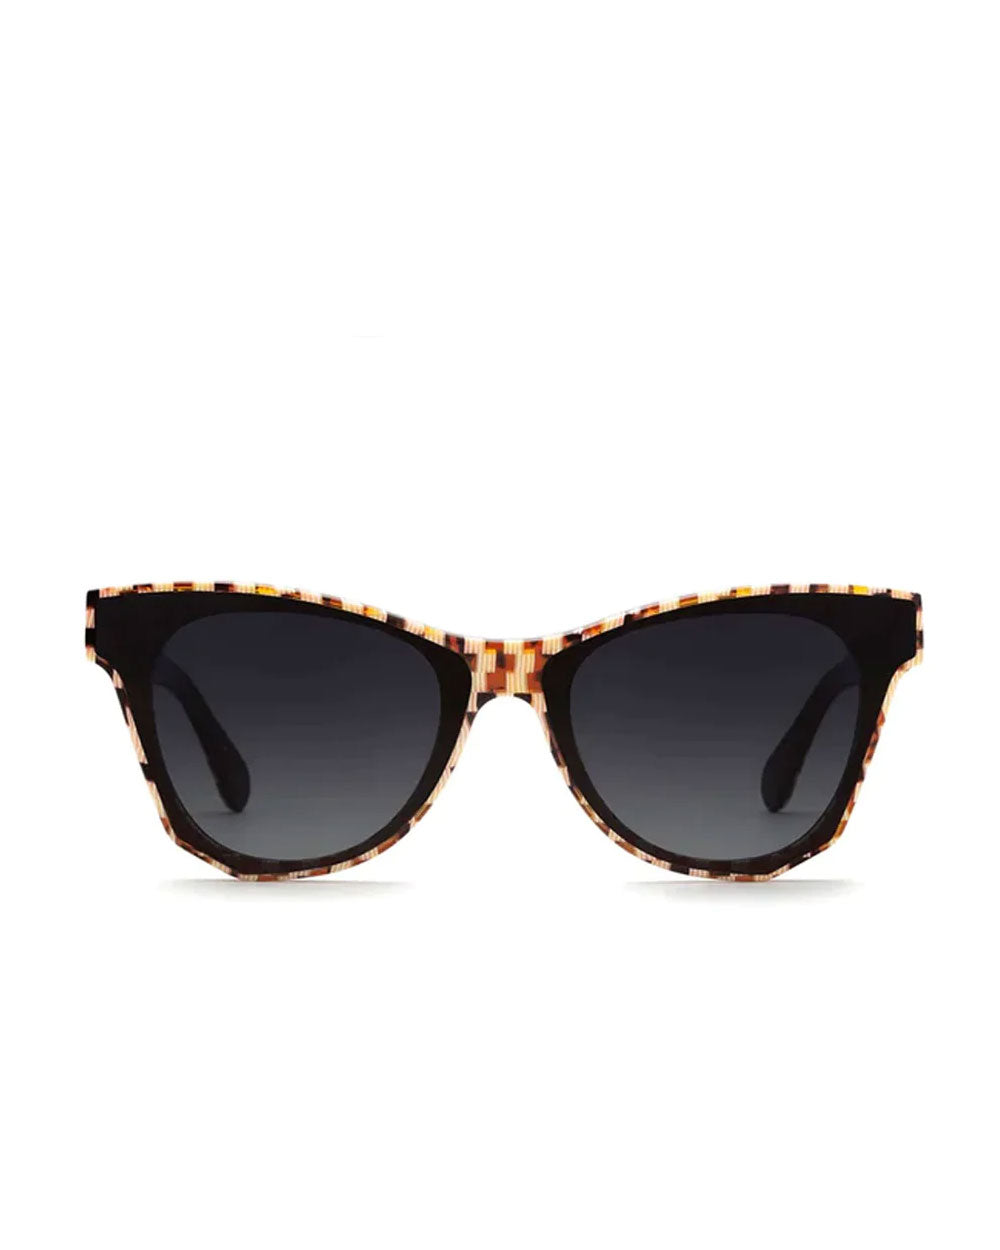 Aubry Sunglasses in Caffe Dolce